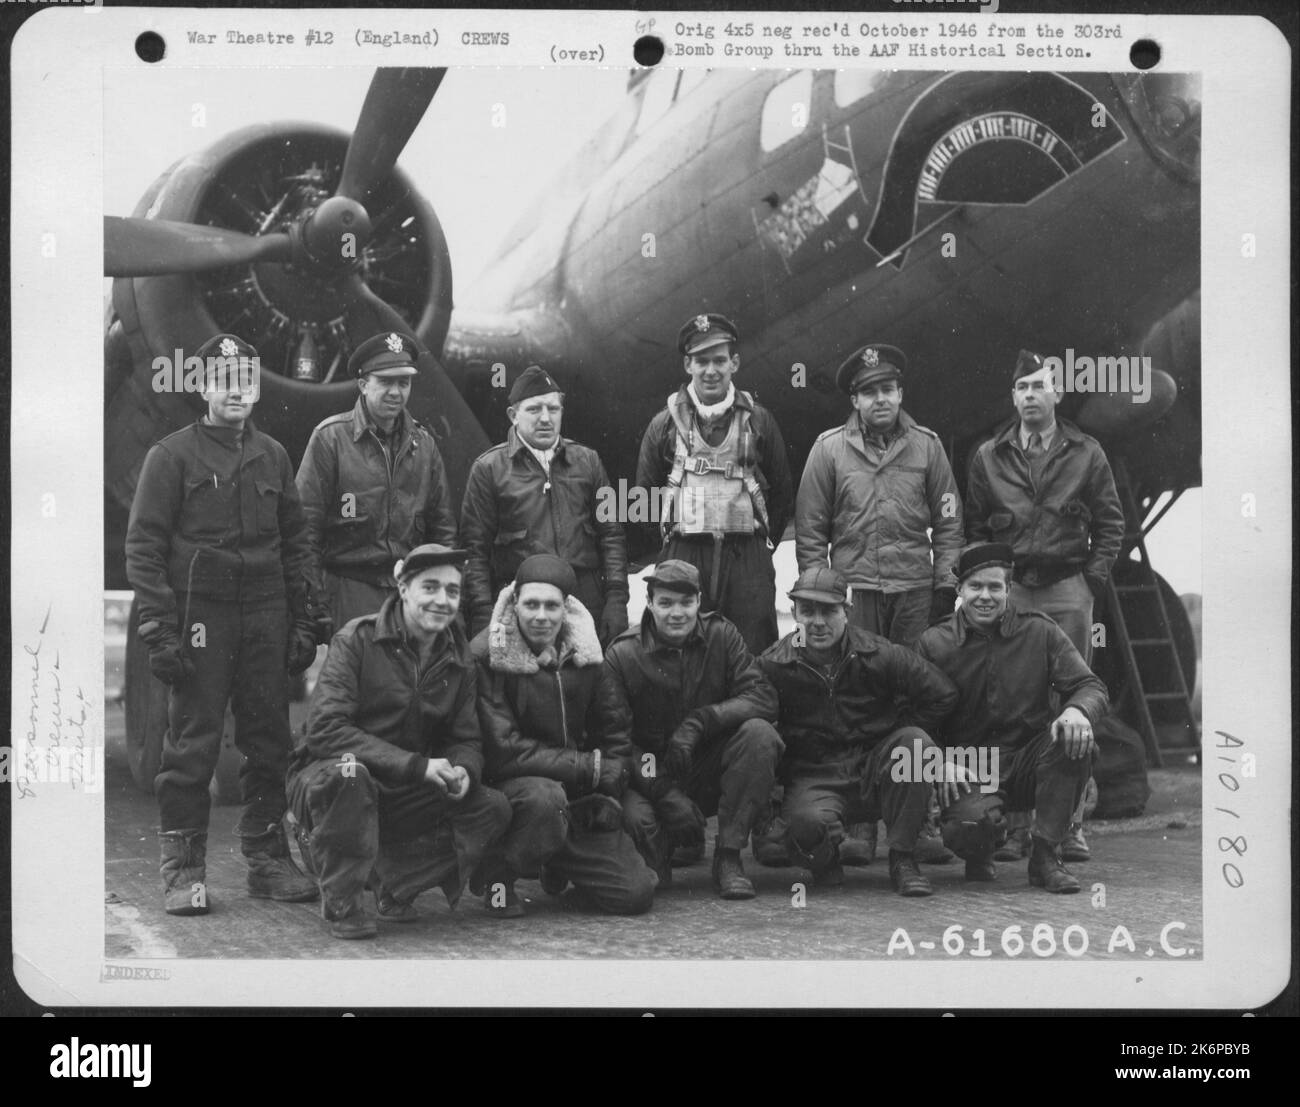 Major Shaylor And Lead Crew On Bombing Mission To Frankfurt, Germany Pose In Front Of A Boeing B-17 Flying Fortress. 360Th Bomb Squadron, 303Rd Bomb Group, England. 5 February 1944. Acft Formerly Named 'Satans Workshop'. Stock Photo